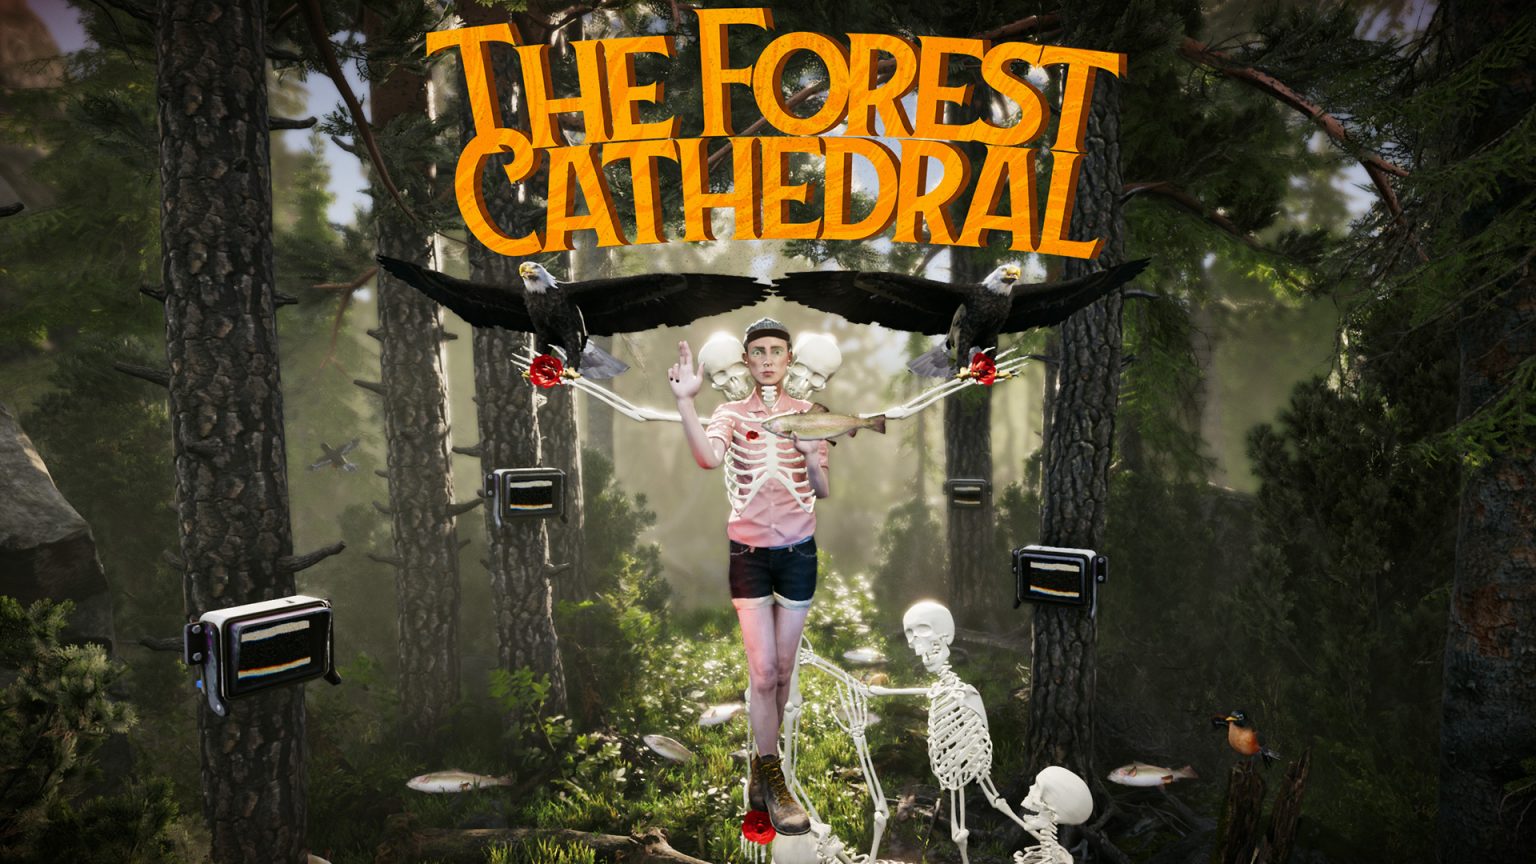 The Forest Cathedral s’estrena avui a PlayStation 5